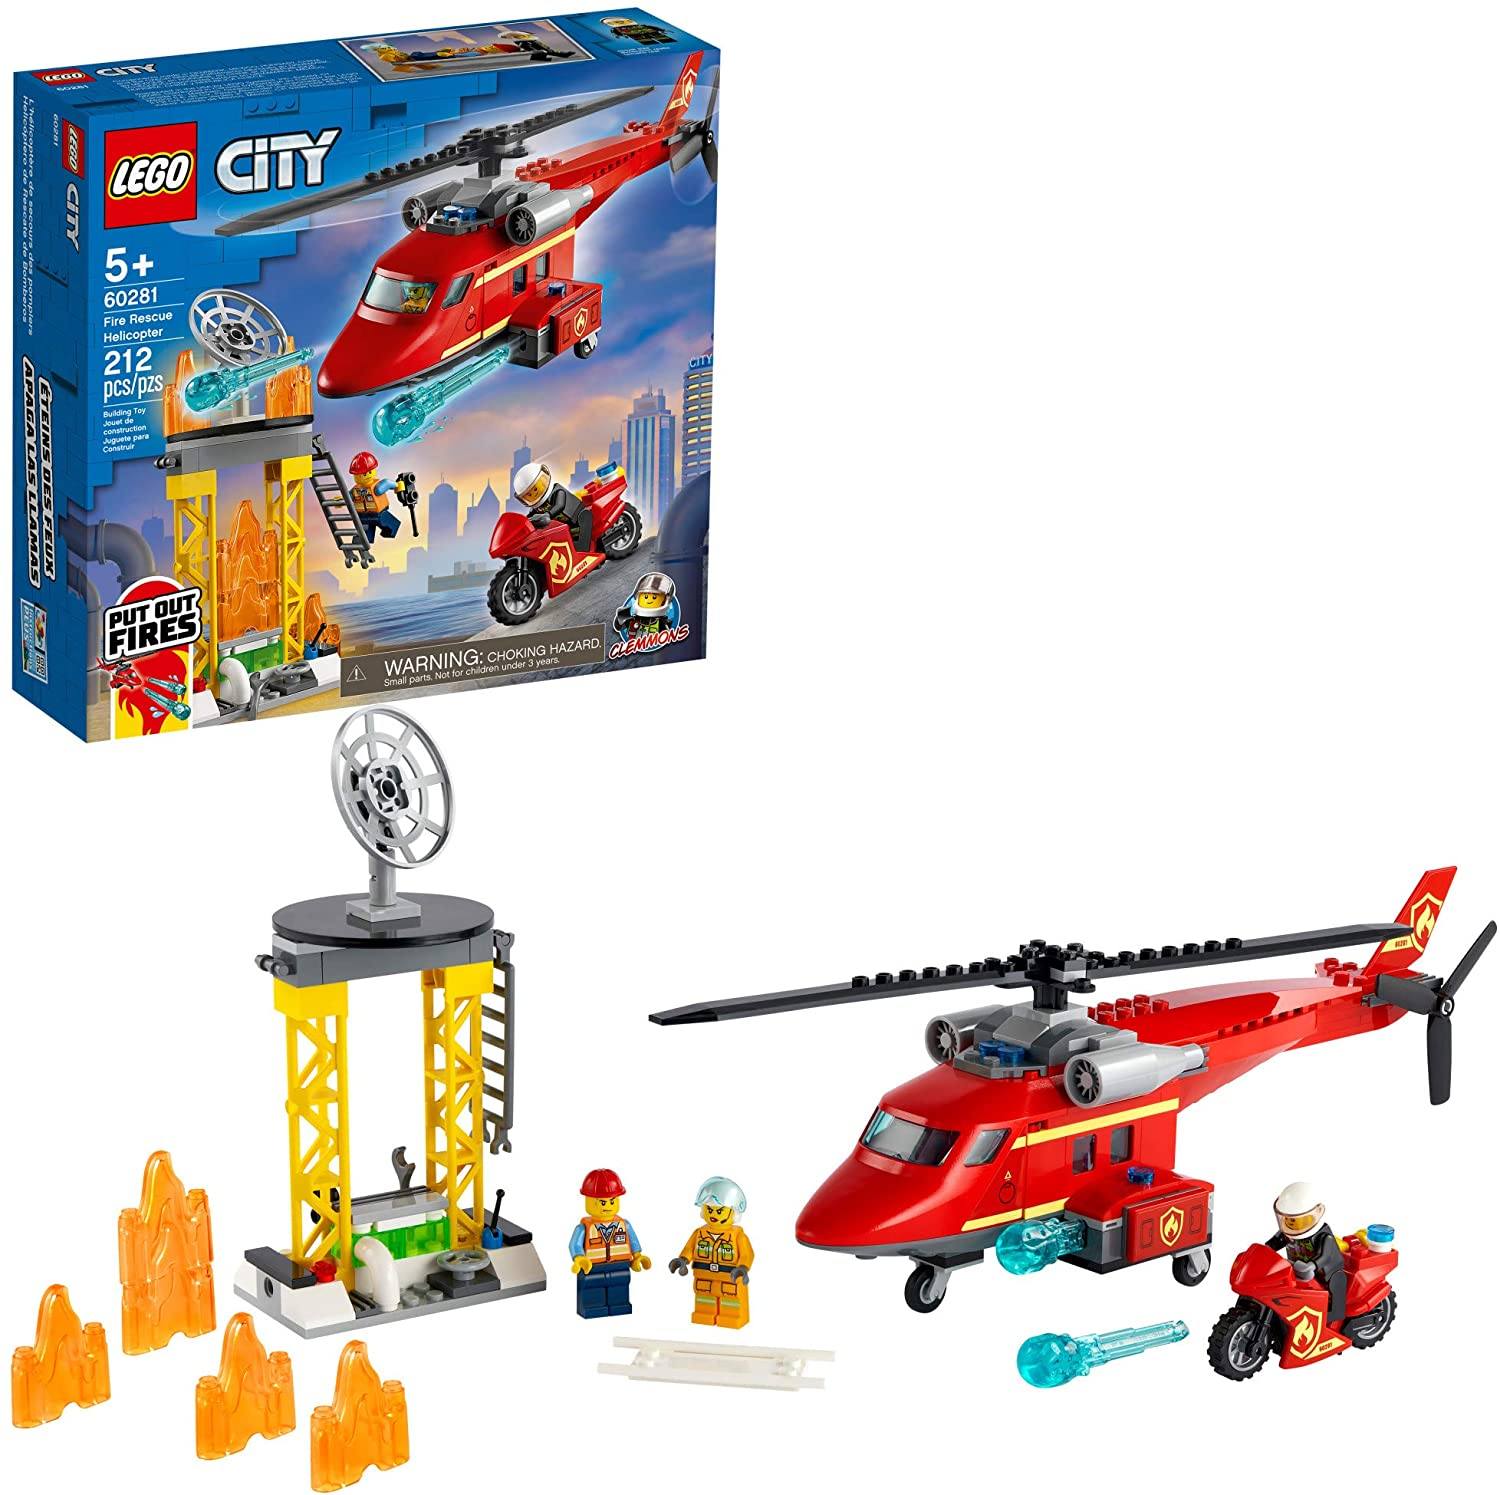 60281 Fire Rescue Helicopter Lego City Building set